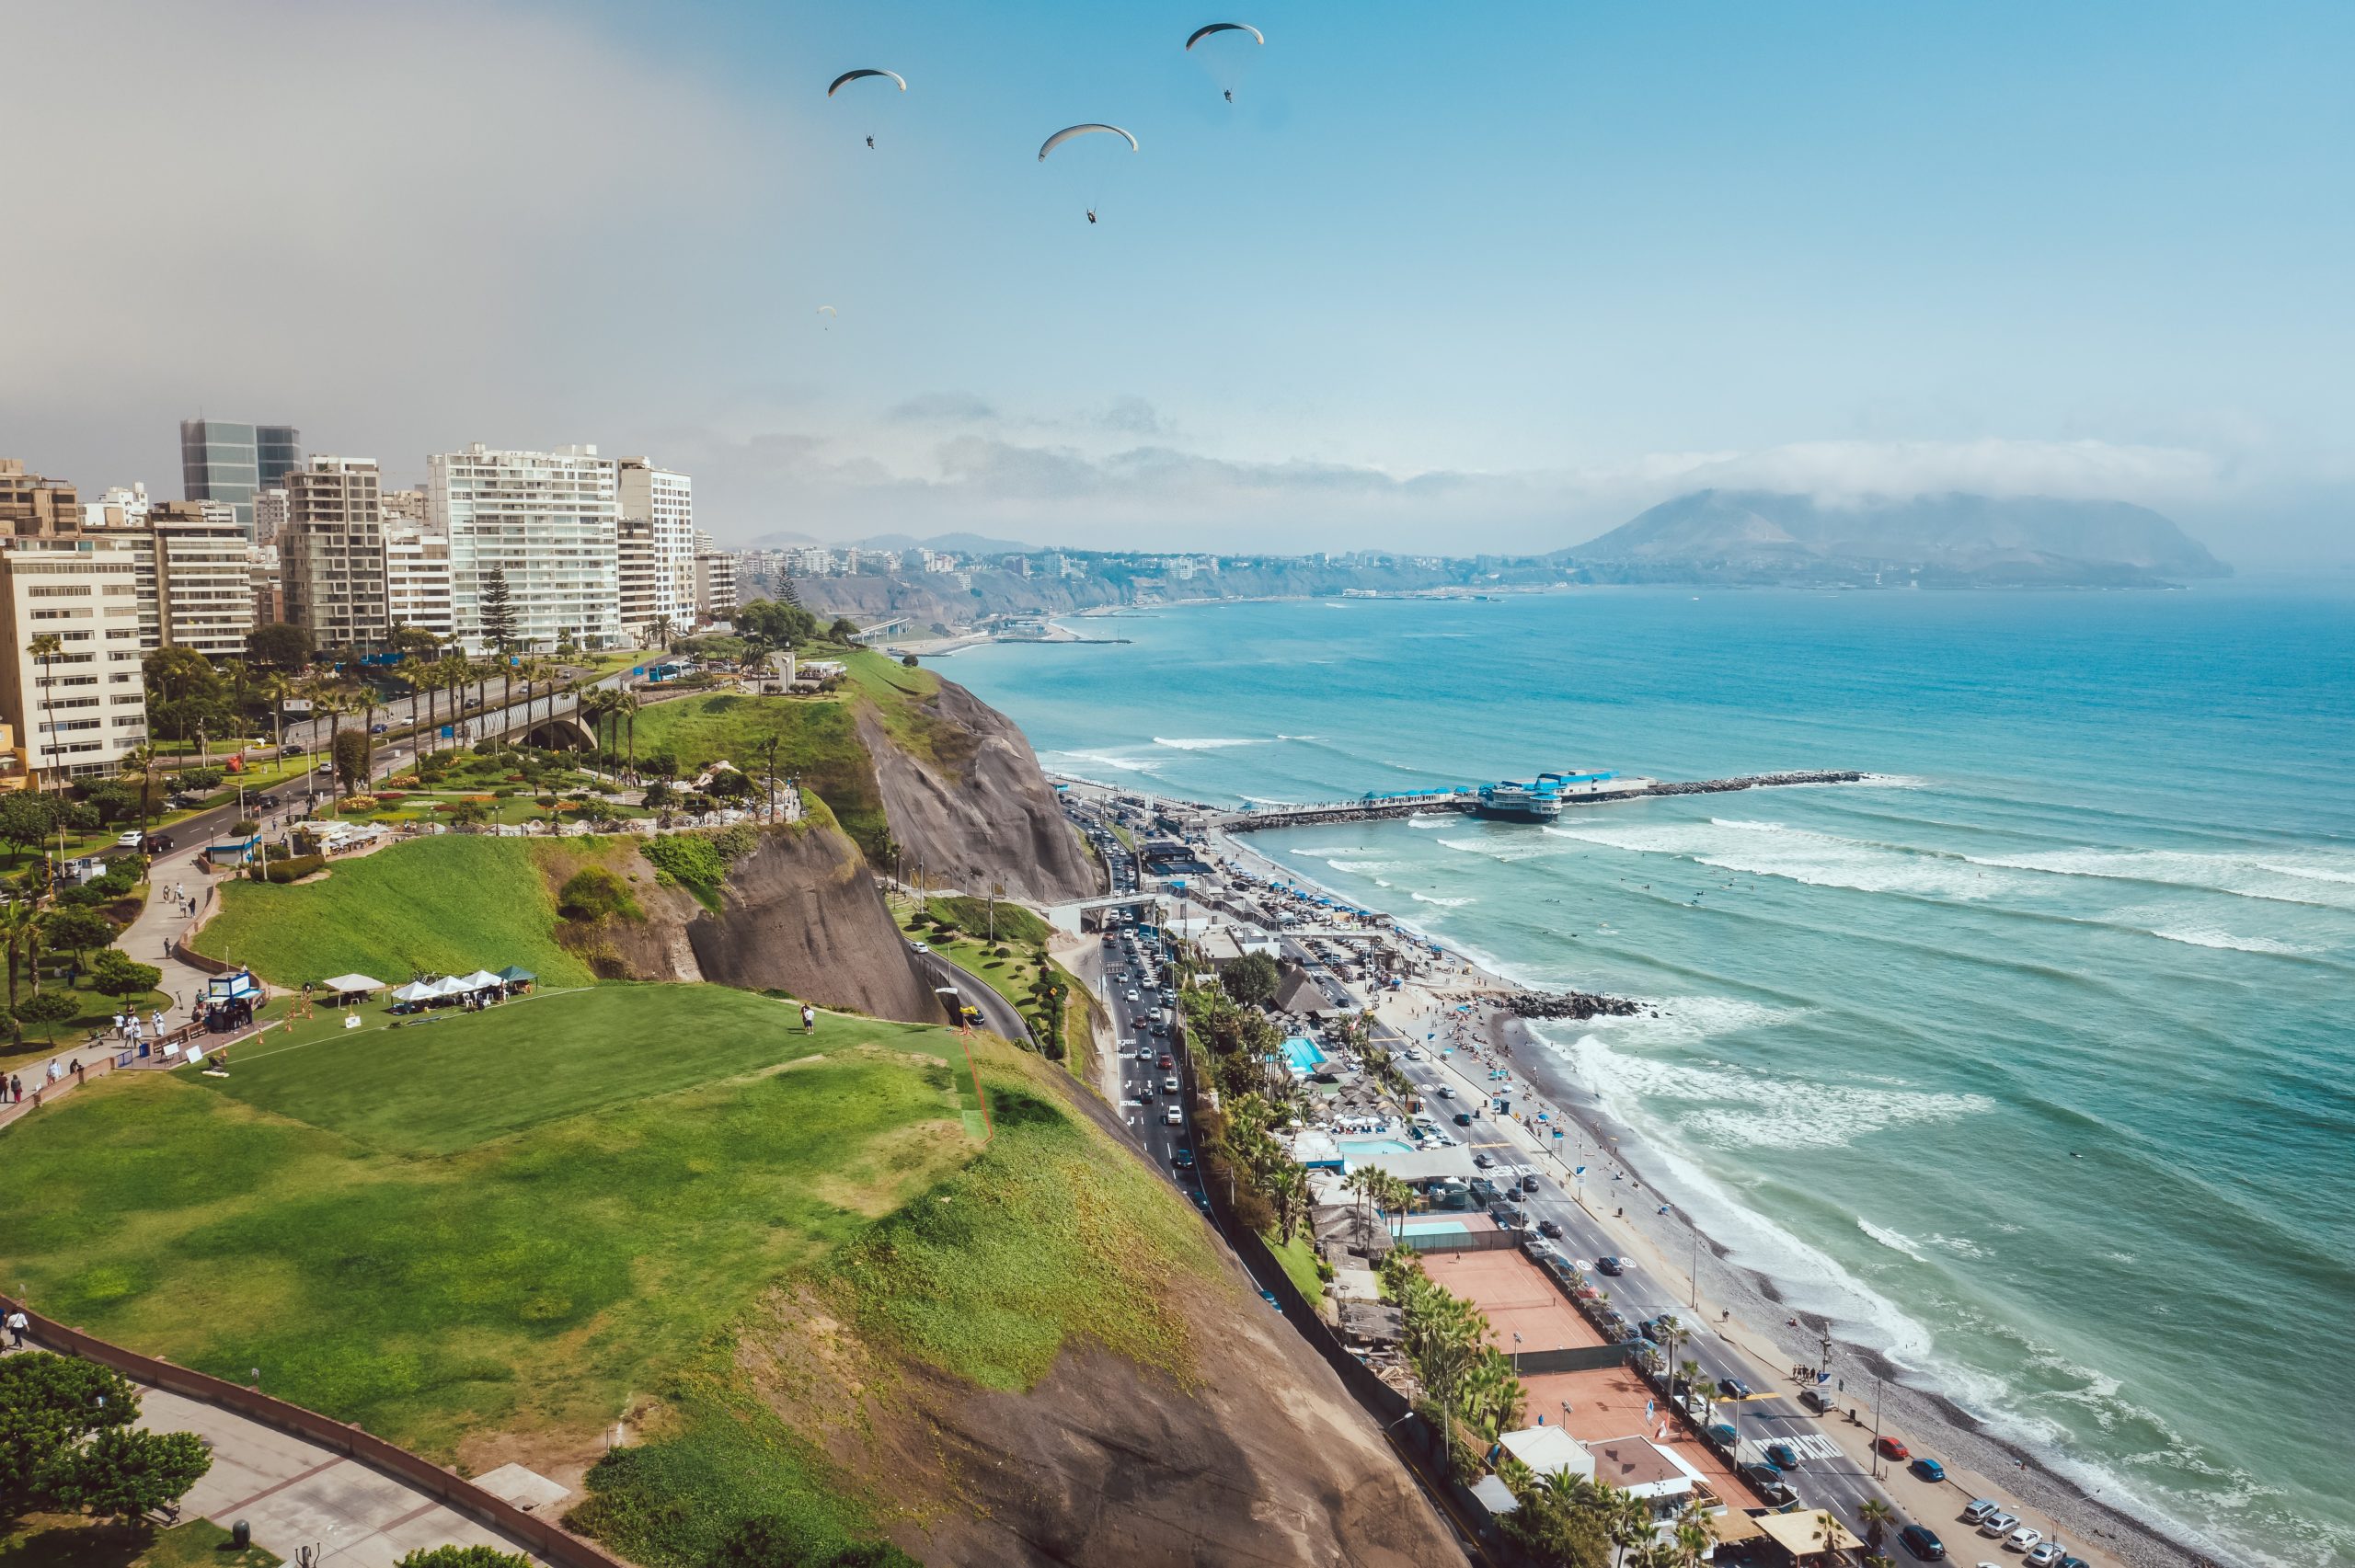 Lima deserves a spot on your bucket list because it’s home to many historic...